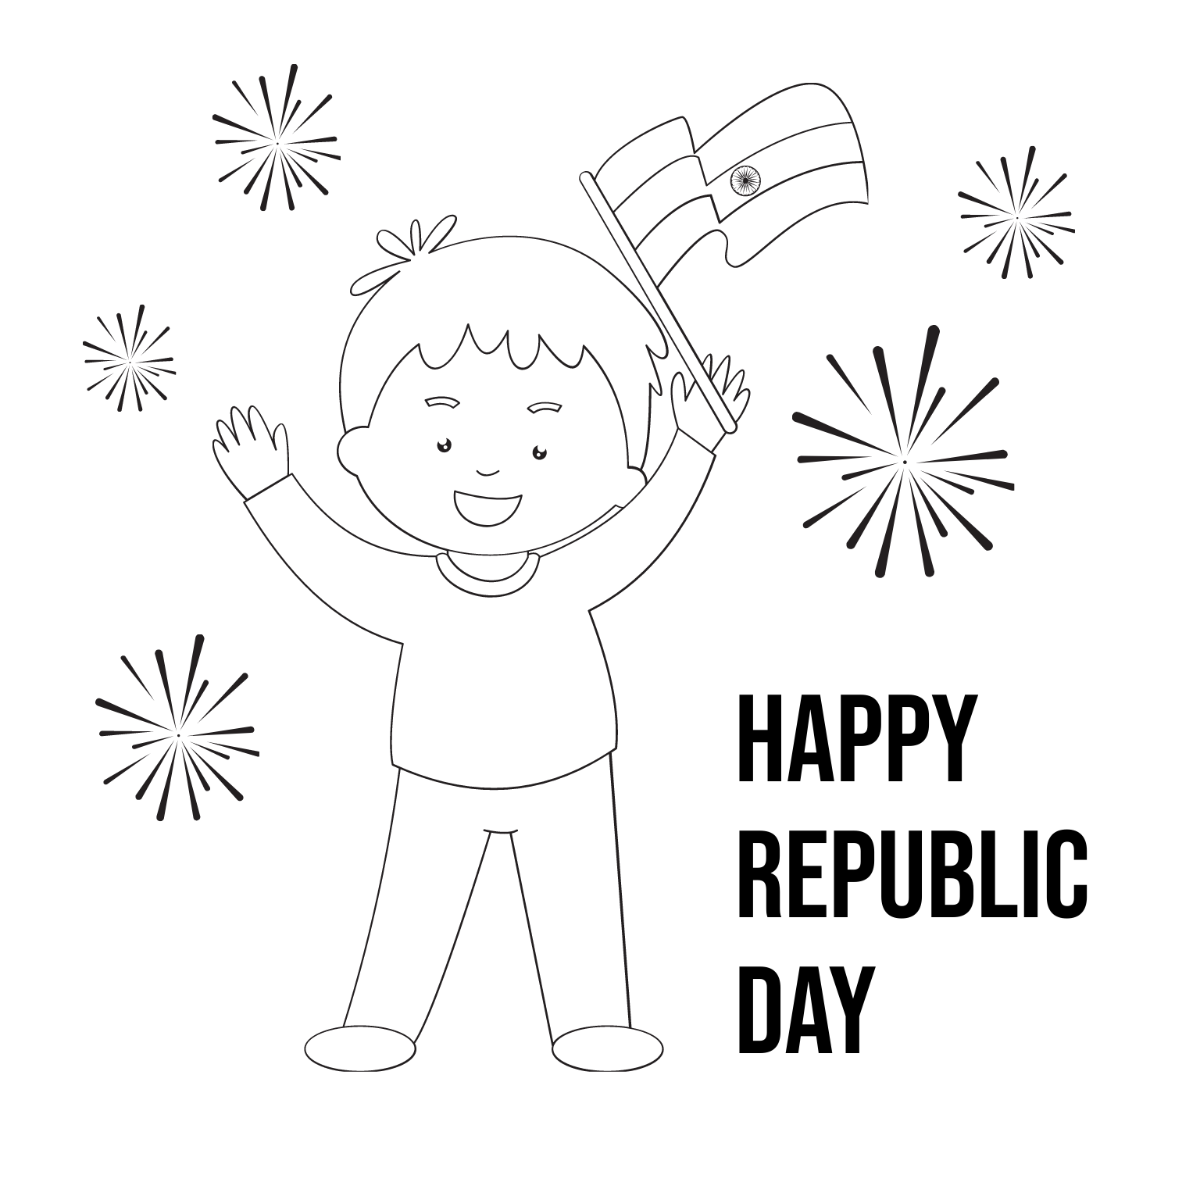 How to Draw Simple Independence Day Special Image For Kids… | Flickr